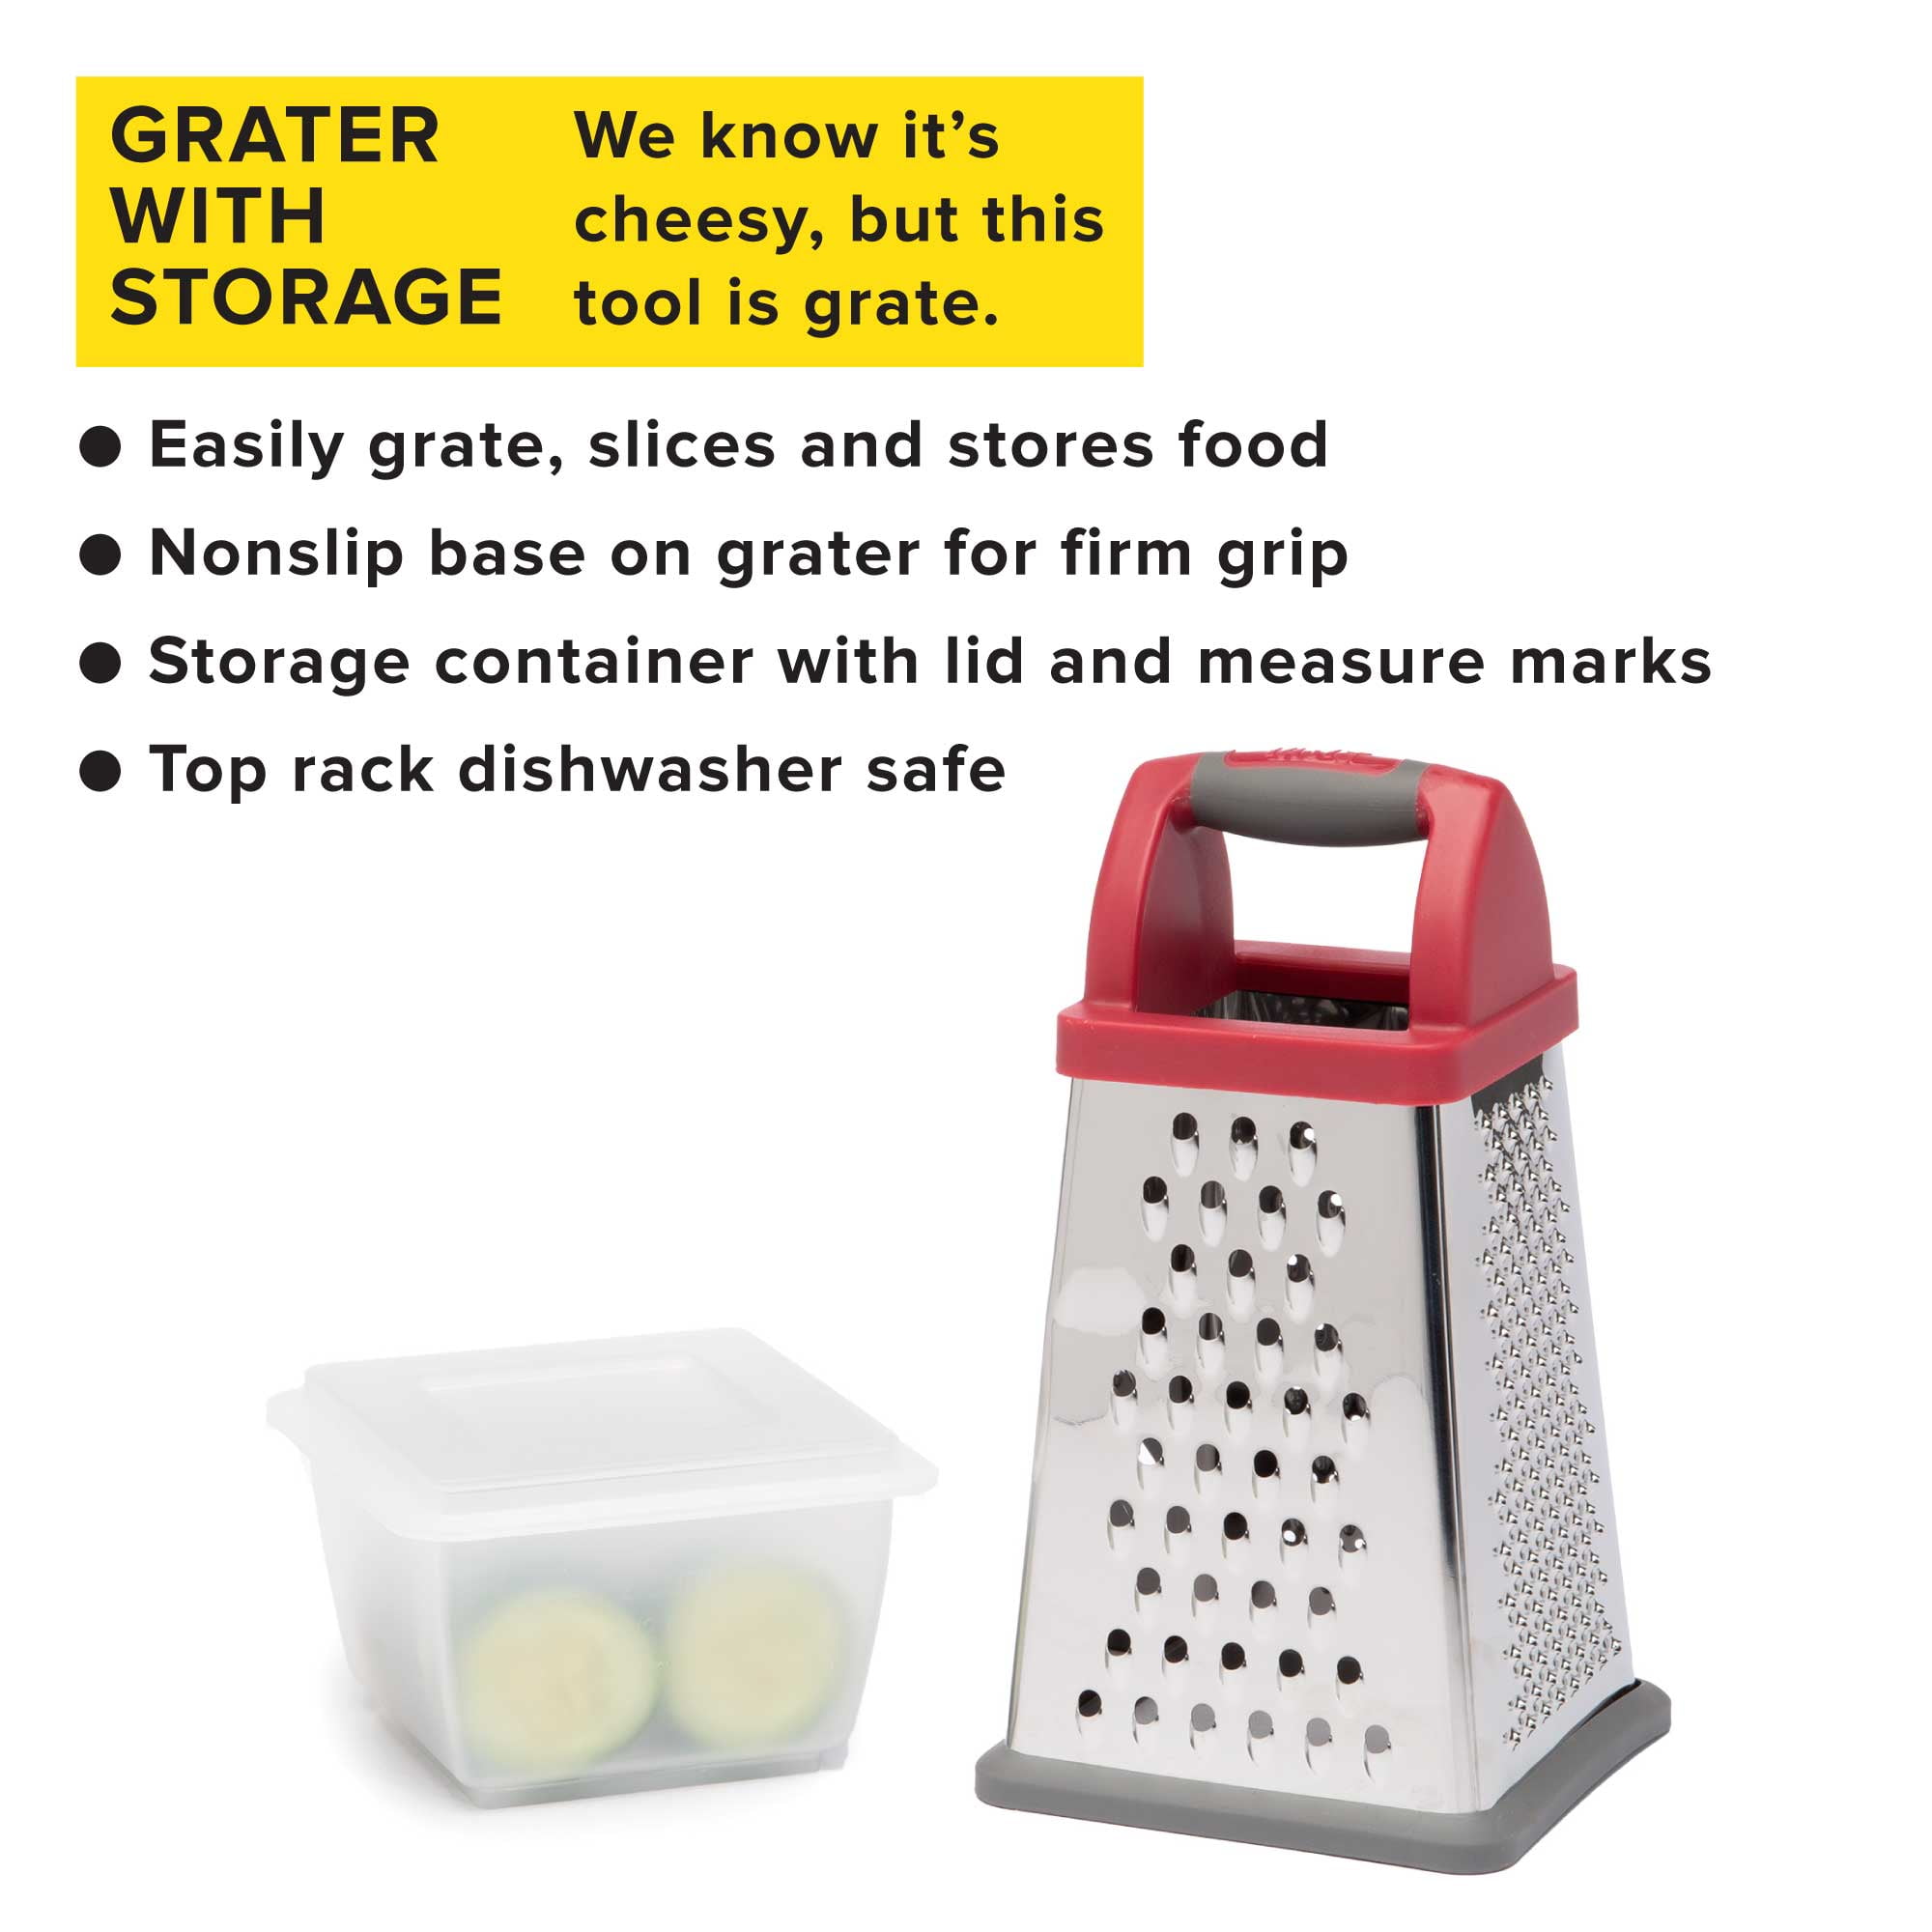 Met Lux Stainless Steel Fine Grater - with Plastic Handle - 12 inch - 1 Count Box